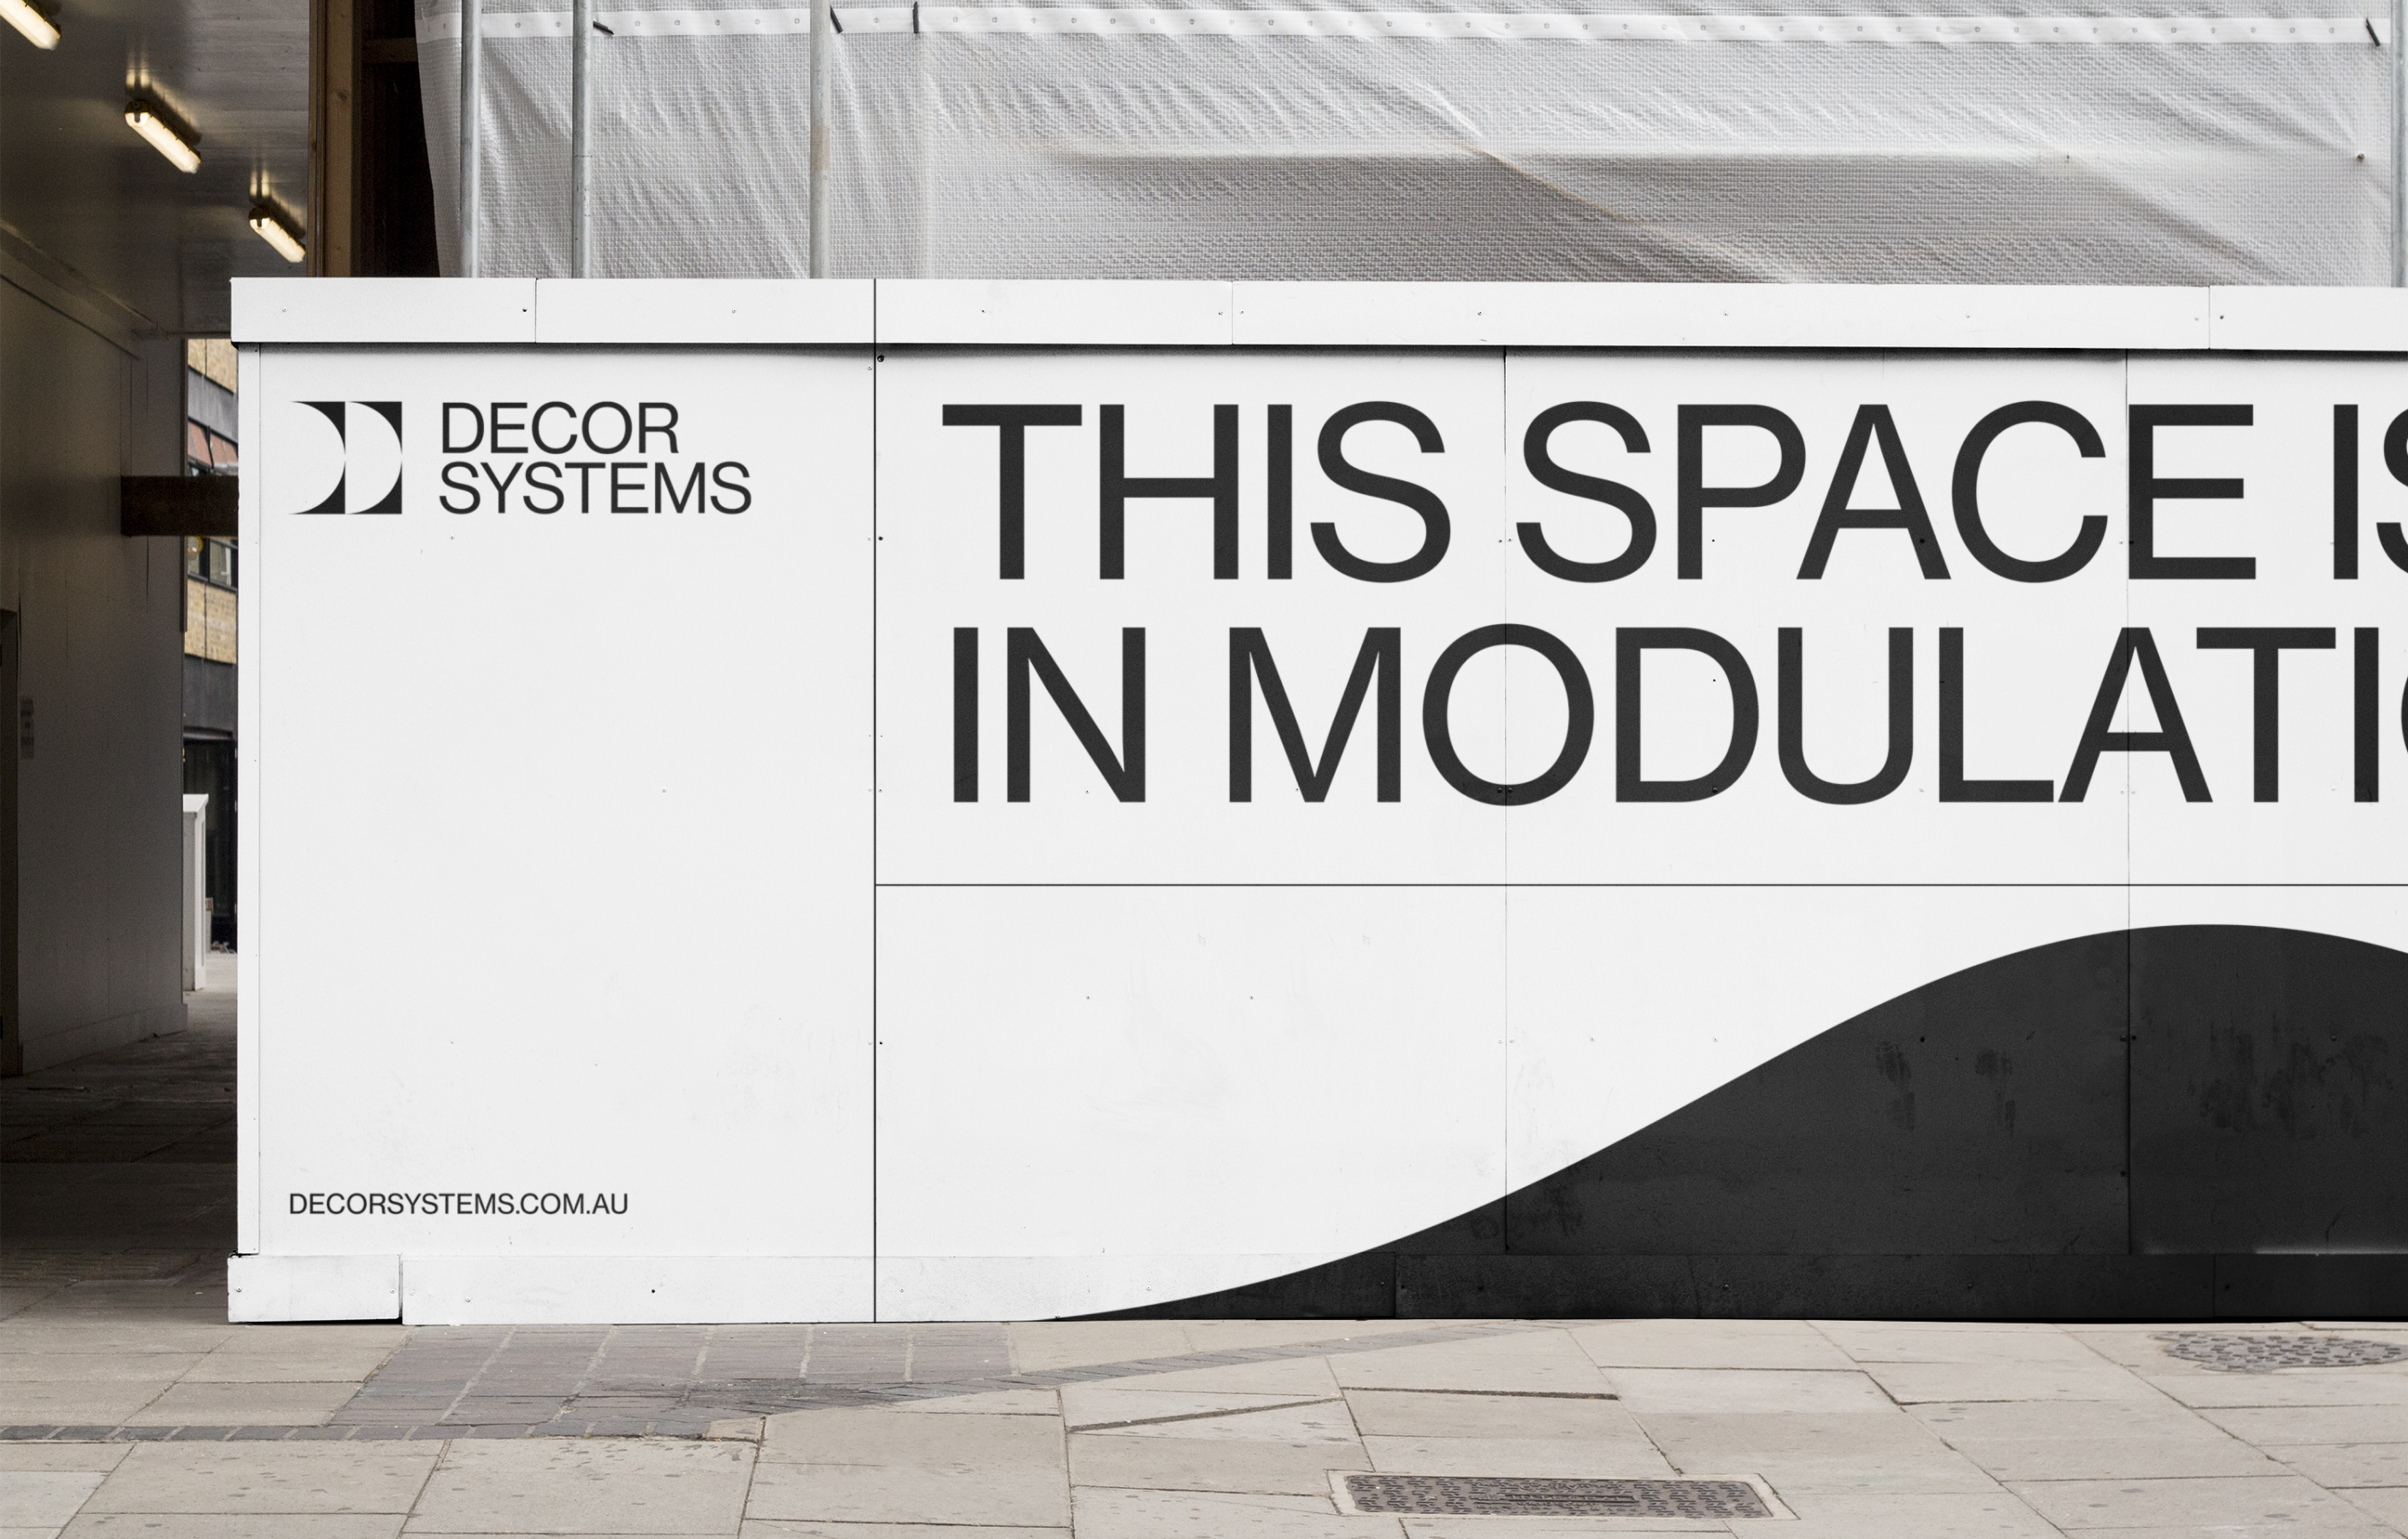 Decor systems advertisement on side of a wall